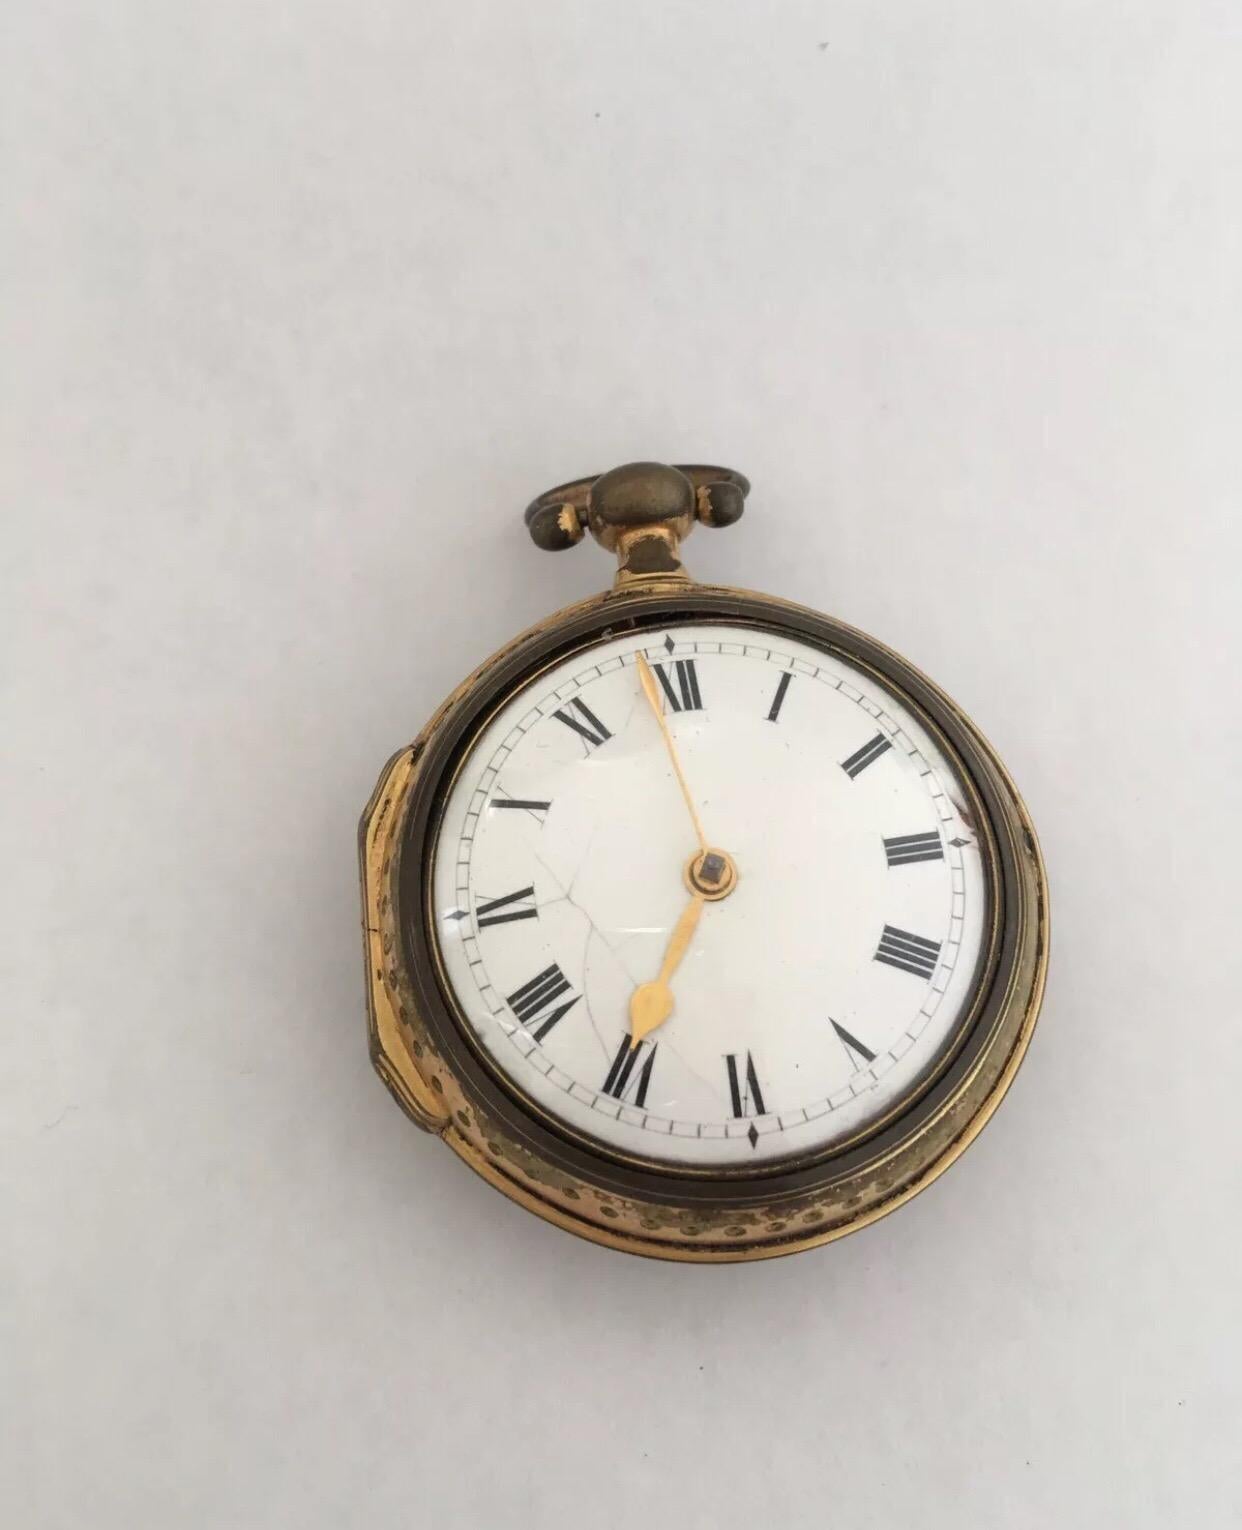 
Rare Early Verge Fusee Pocket Watch Signed John Scott, Gloucester Street, London.


Condition:

The metal case is tarnished as seen on photos, movements doesn’t seems to work, I tried winding it, it ticks a bit then it stop. the balance wheel spins